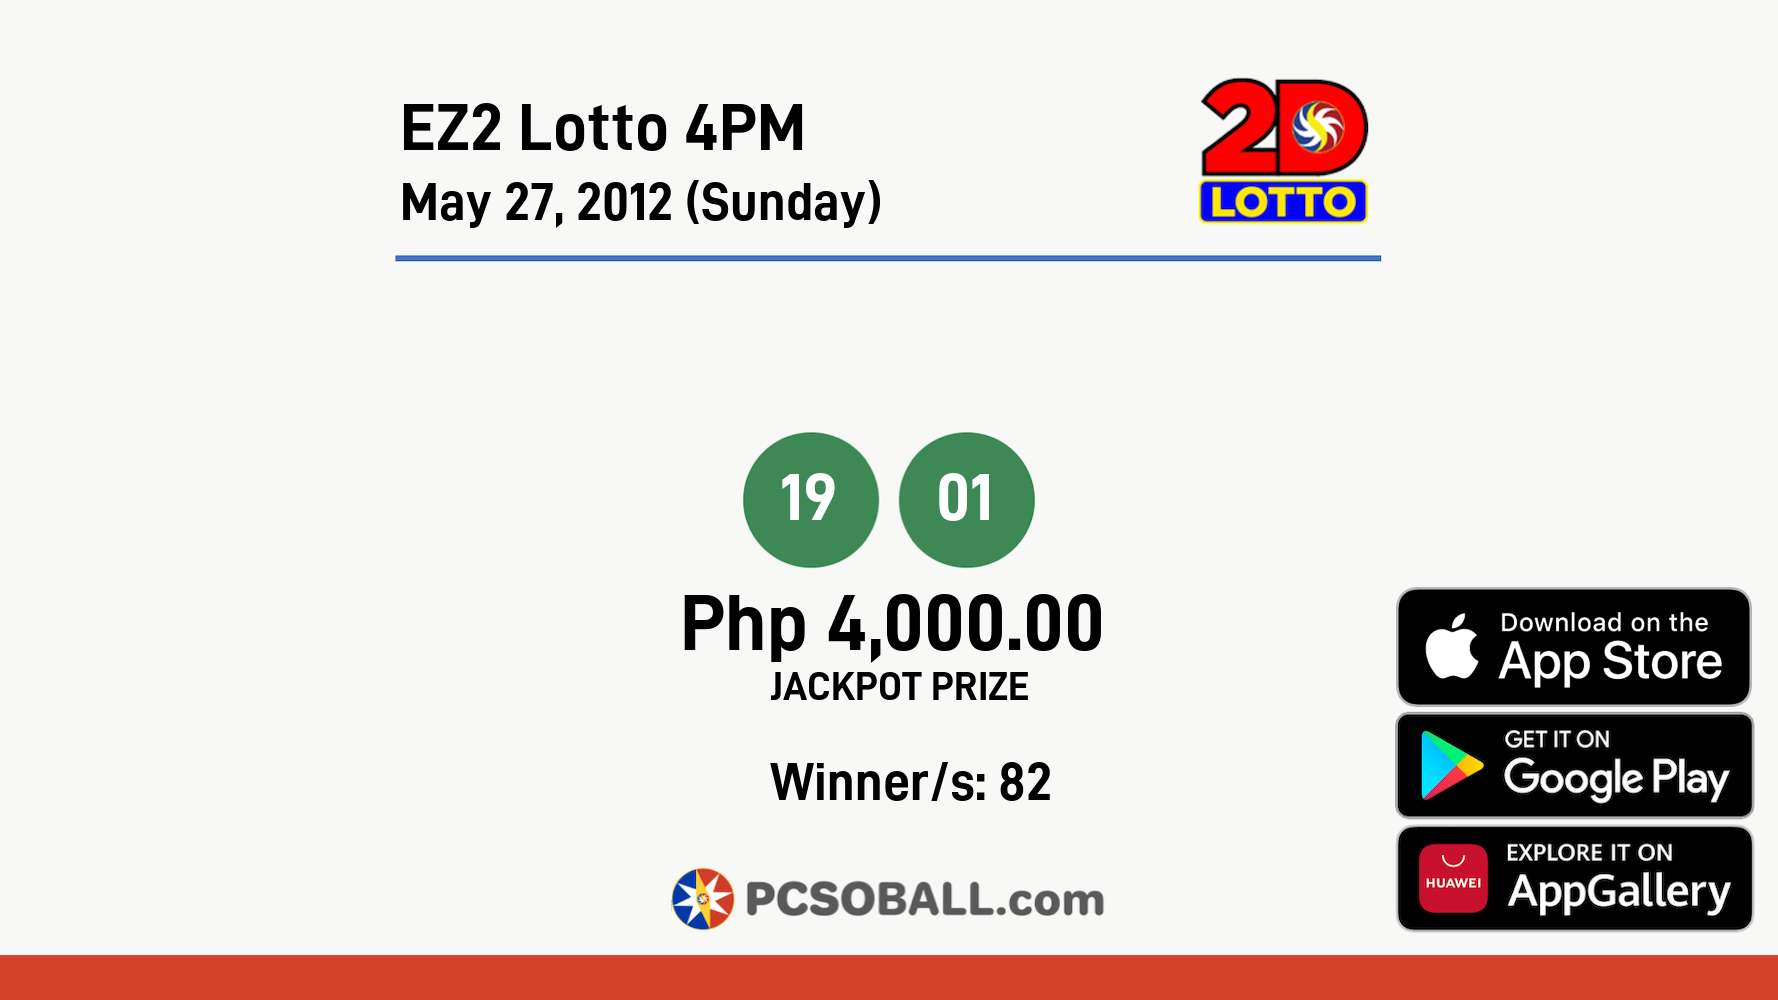 EZ2 Lotto 4PM May 27, 2012 (Sunday) Result